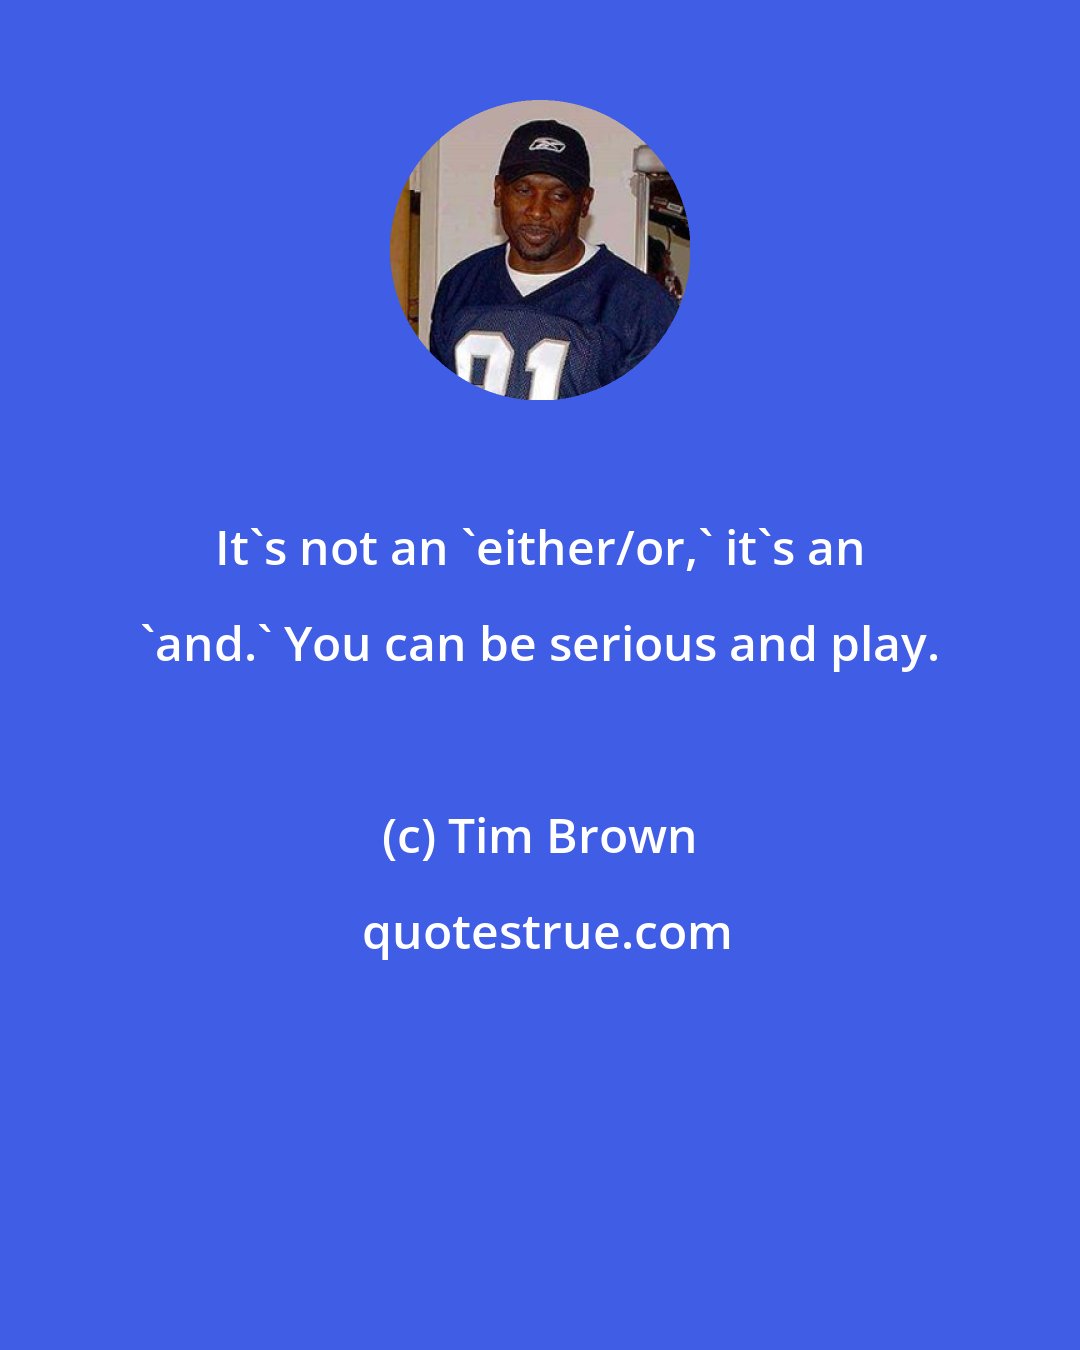 Tim Brown: It's not an 'either/or,' it's an 'and.' You can be serious and play.